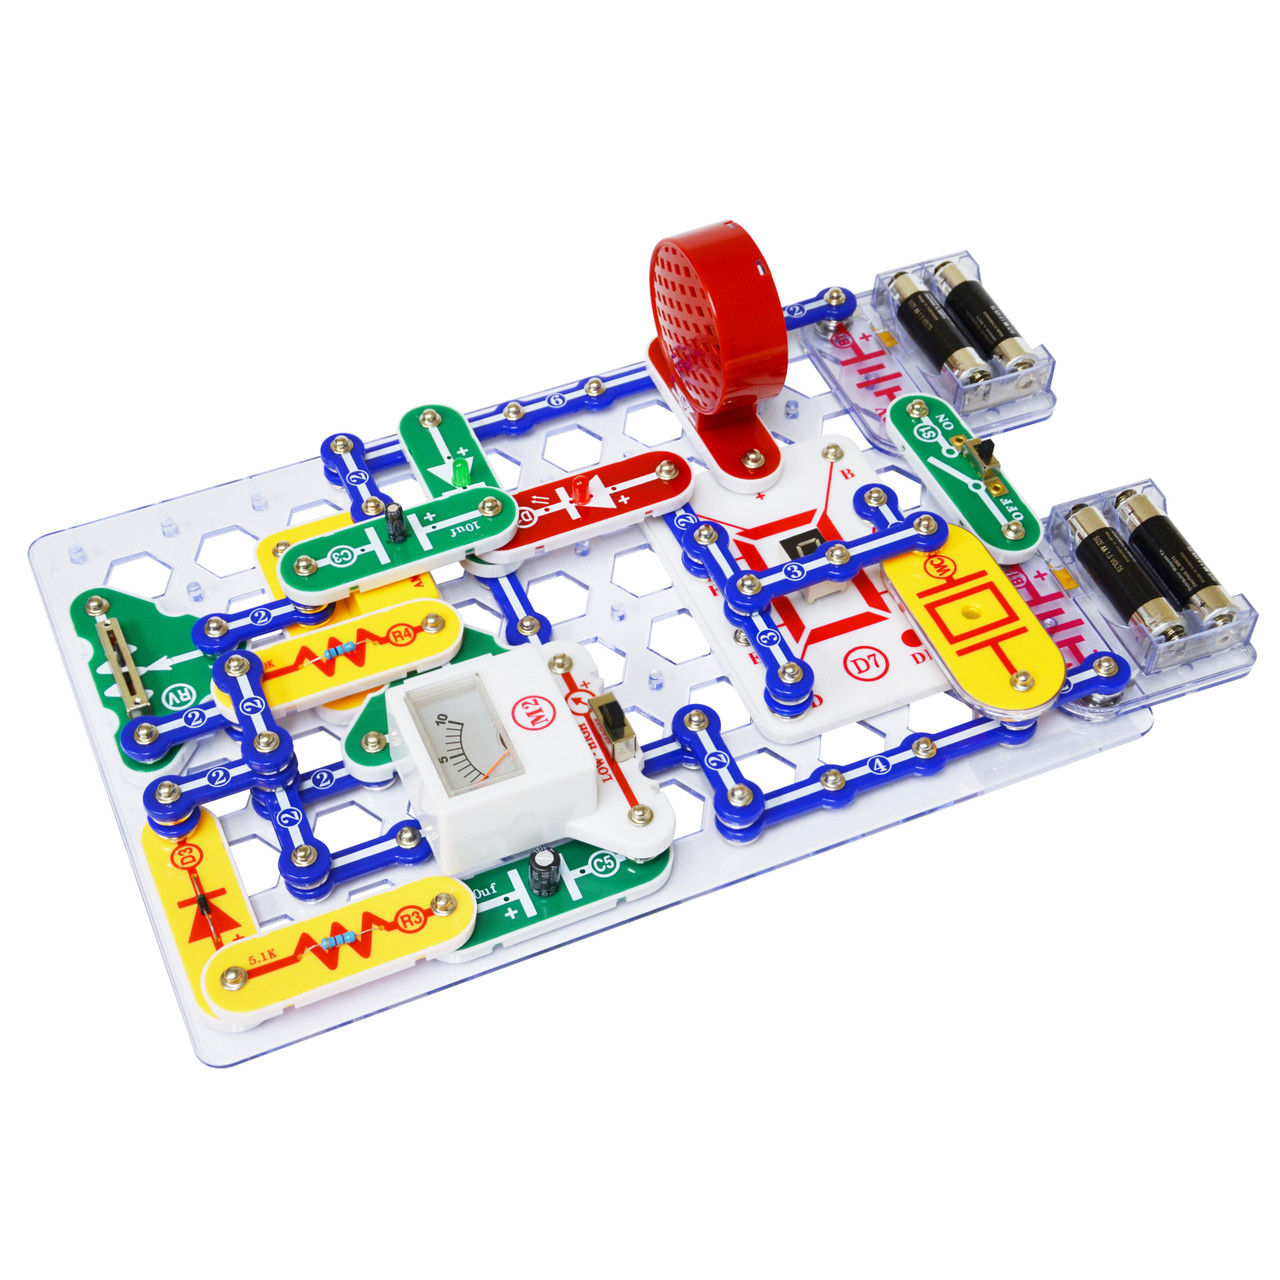 Snap Circuits 300-in-1 Experiments Learn Electronics Kit - The STEM Store:  Educational STEM Toys & Games